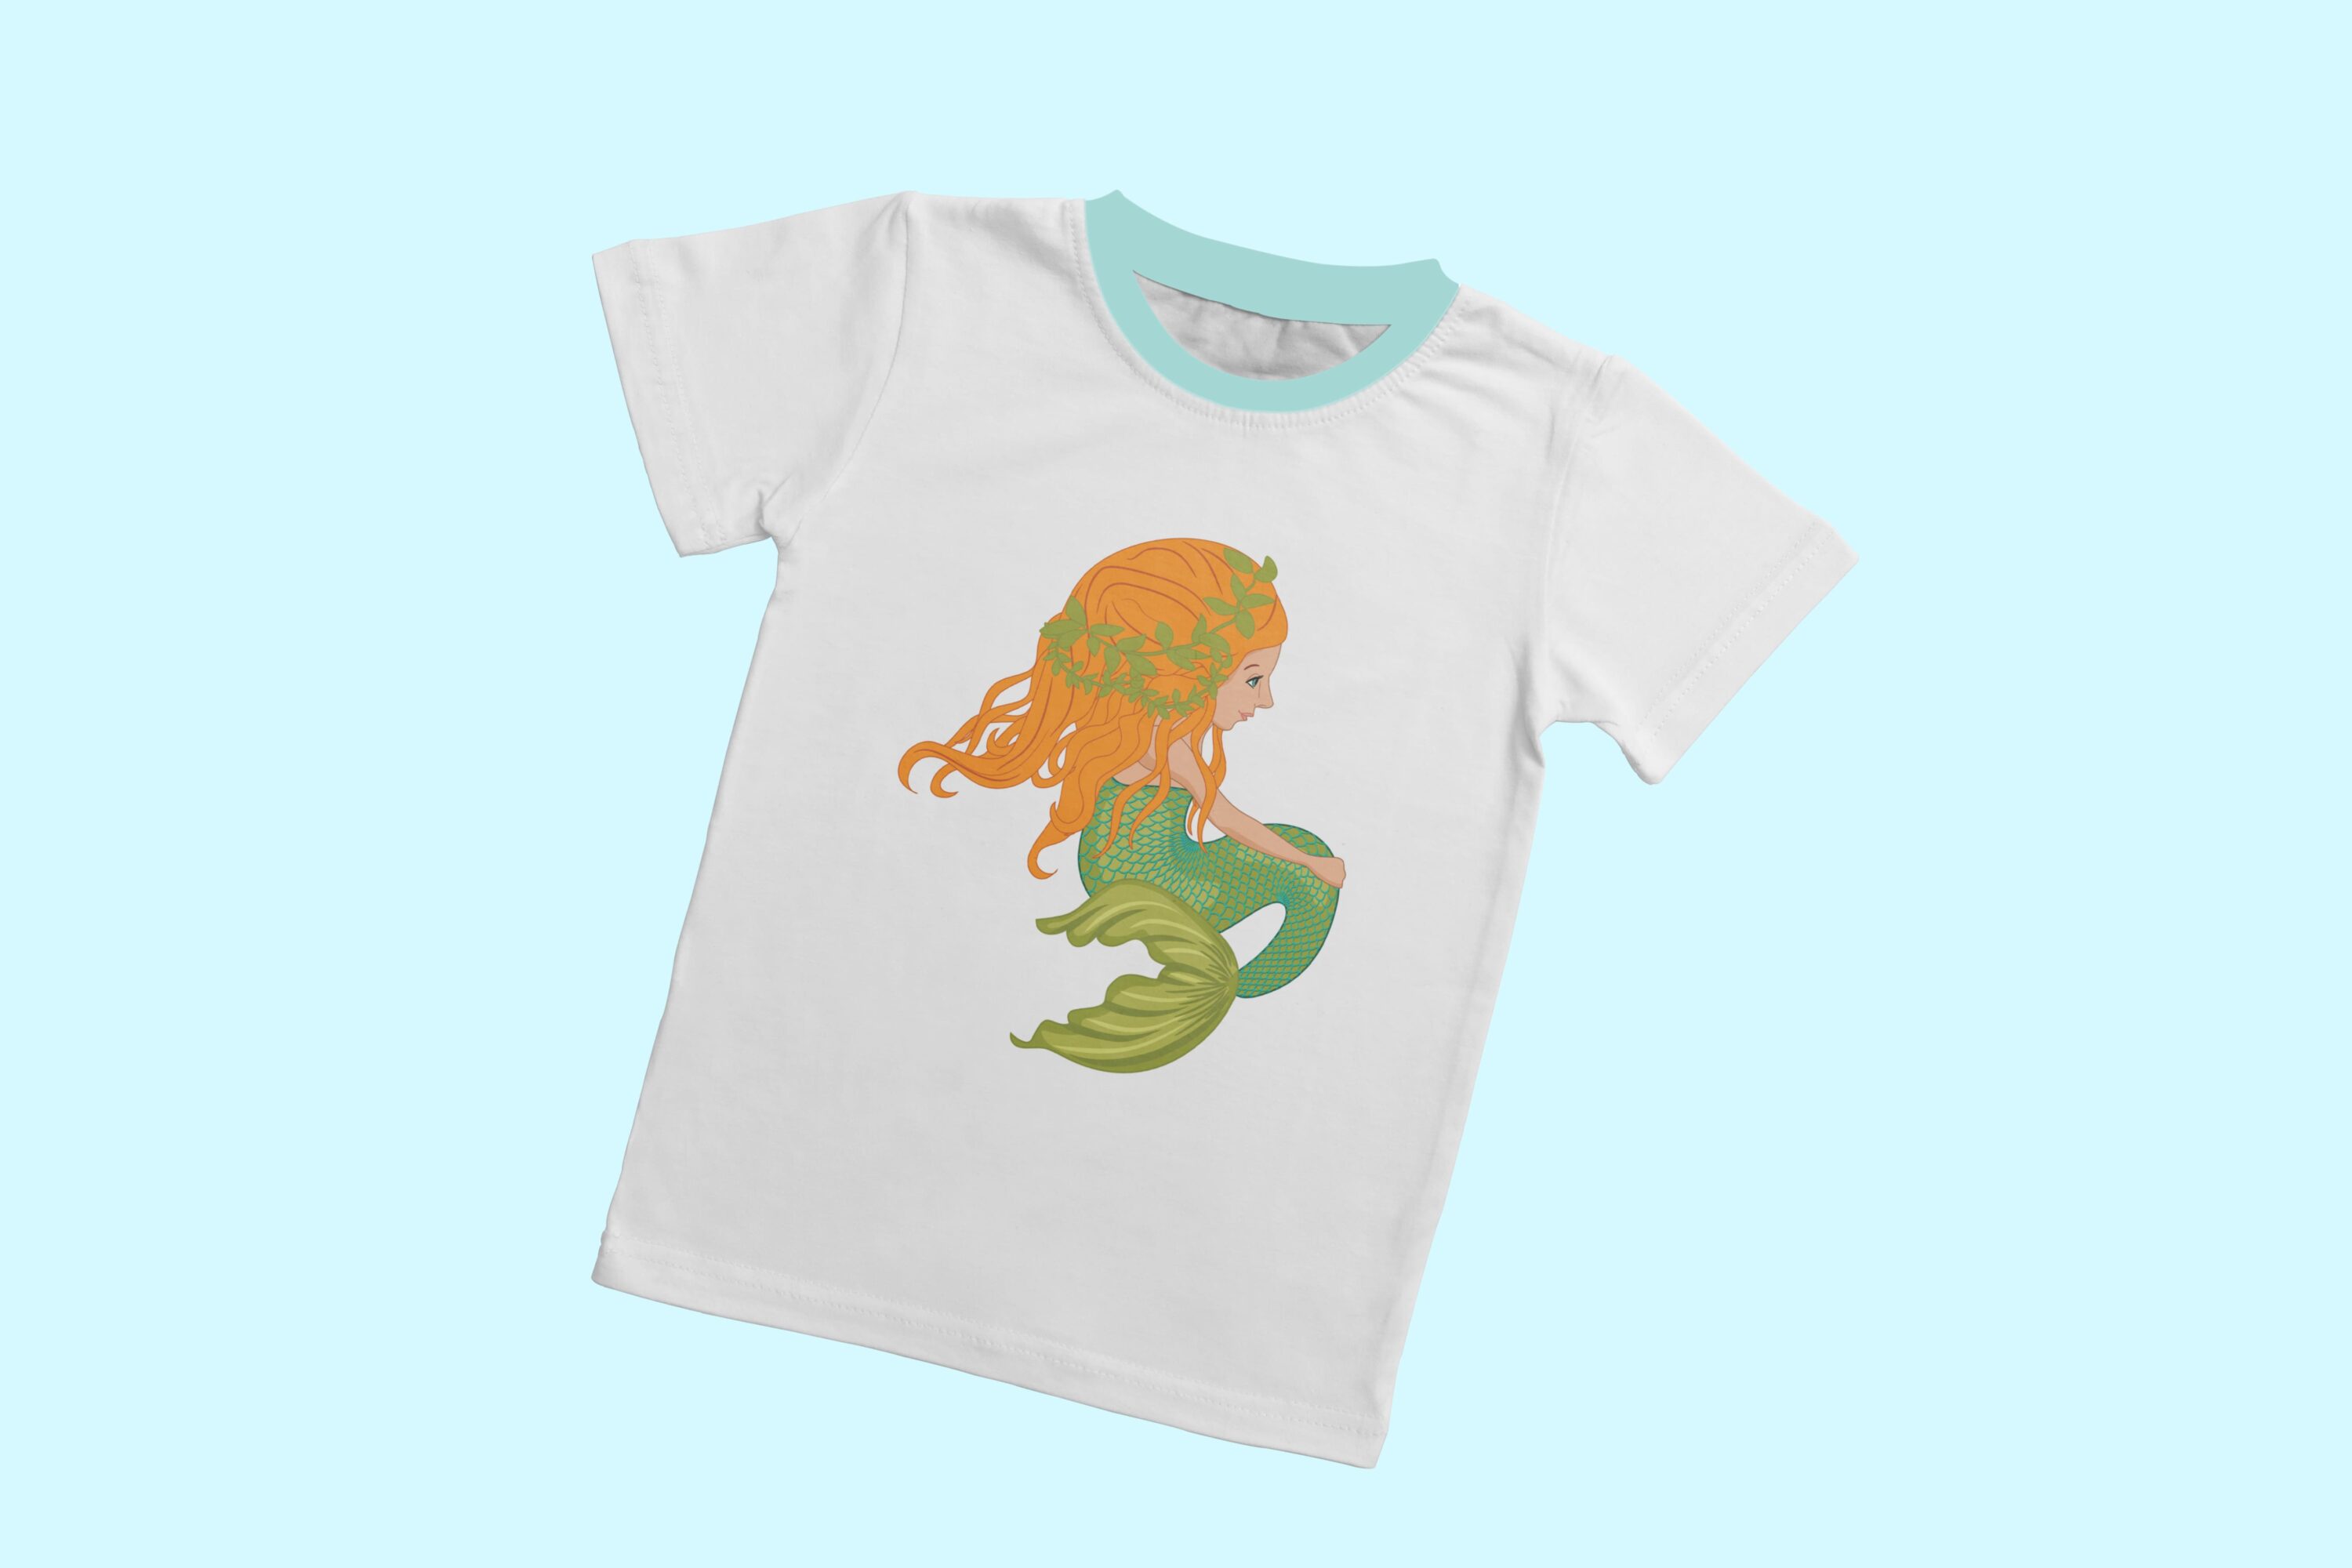 Cute mermaid with the ginger hair.